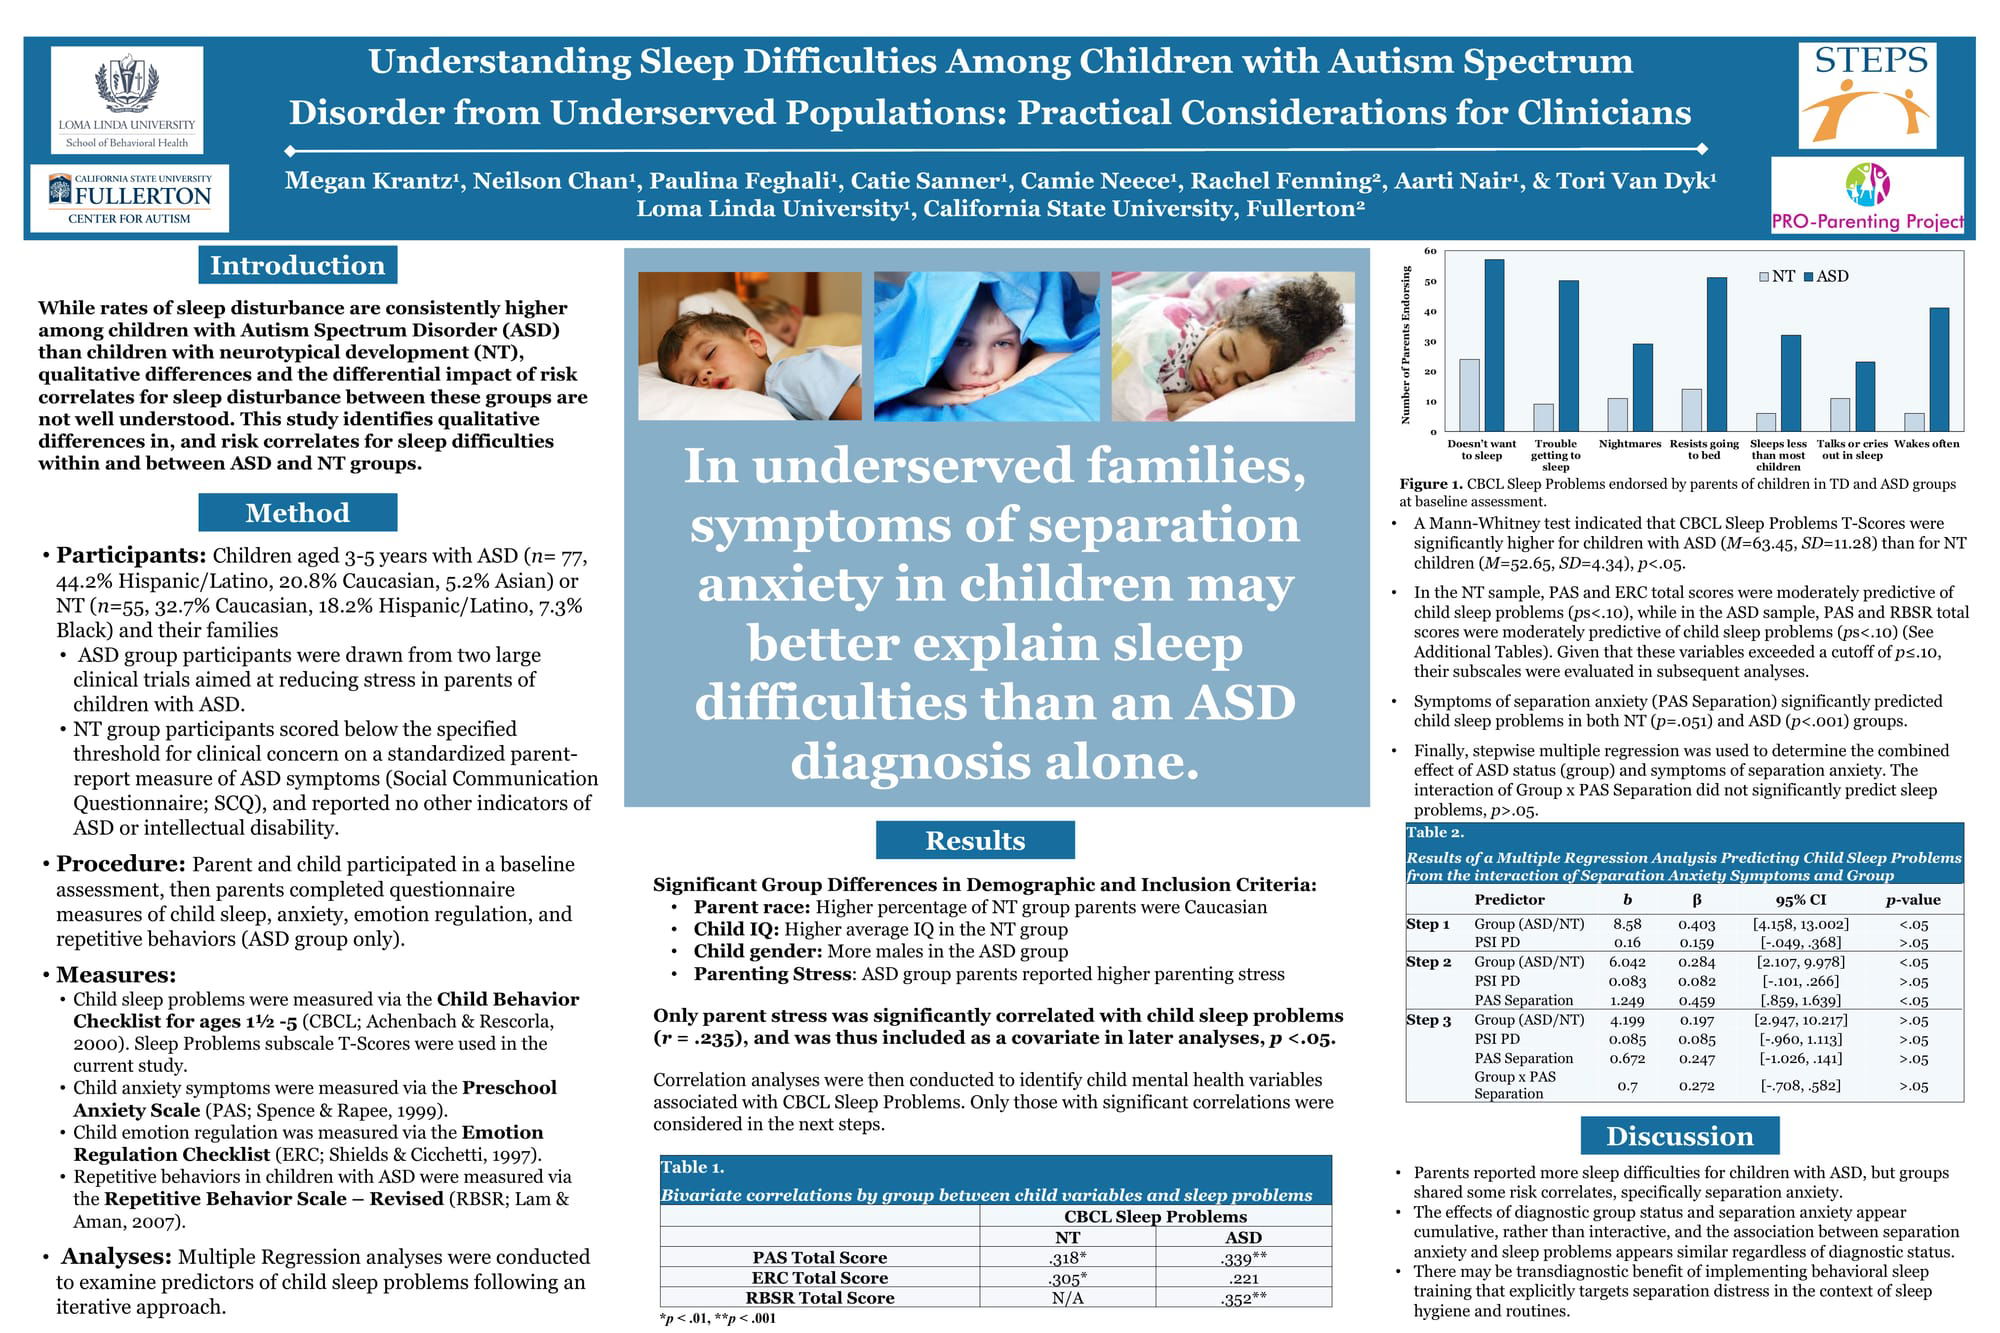 Understanding Sleep Difficulties Among Children with Autism Spectrum Disorder from Underserved Populations: Practical Considerations for Clinicians